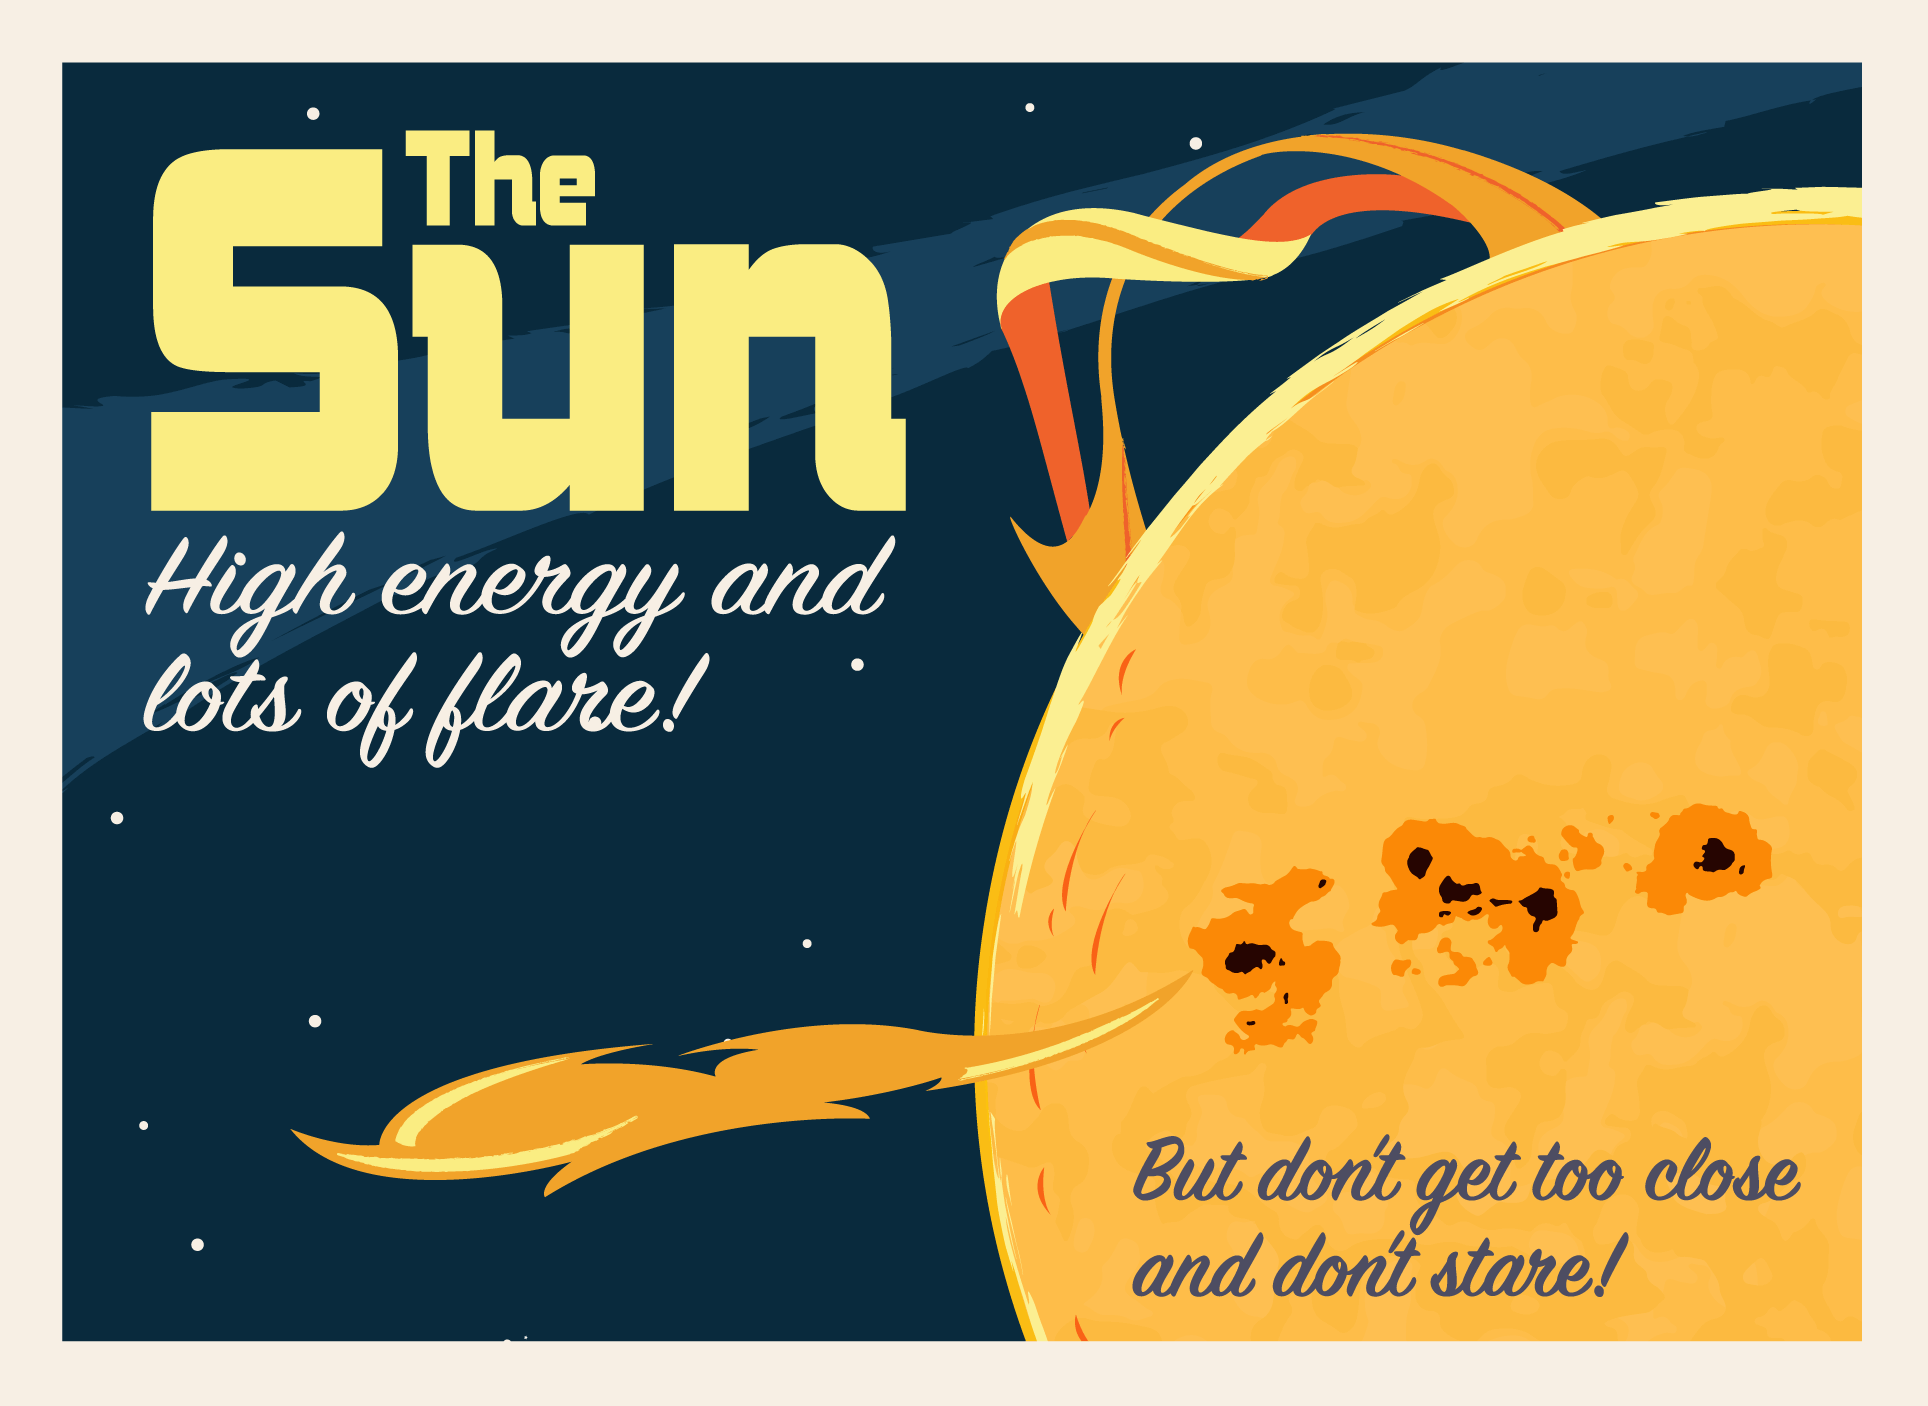 Postcard advertising travel to the Sun. The text on the postcard reads The Sun - High energy and lots of flare, but don't get too close and don't stare! Behind the text is an illustration of the Sun, with a solar flare, coronal mass ejection and sunspots.